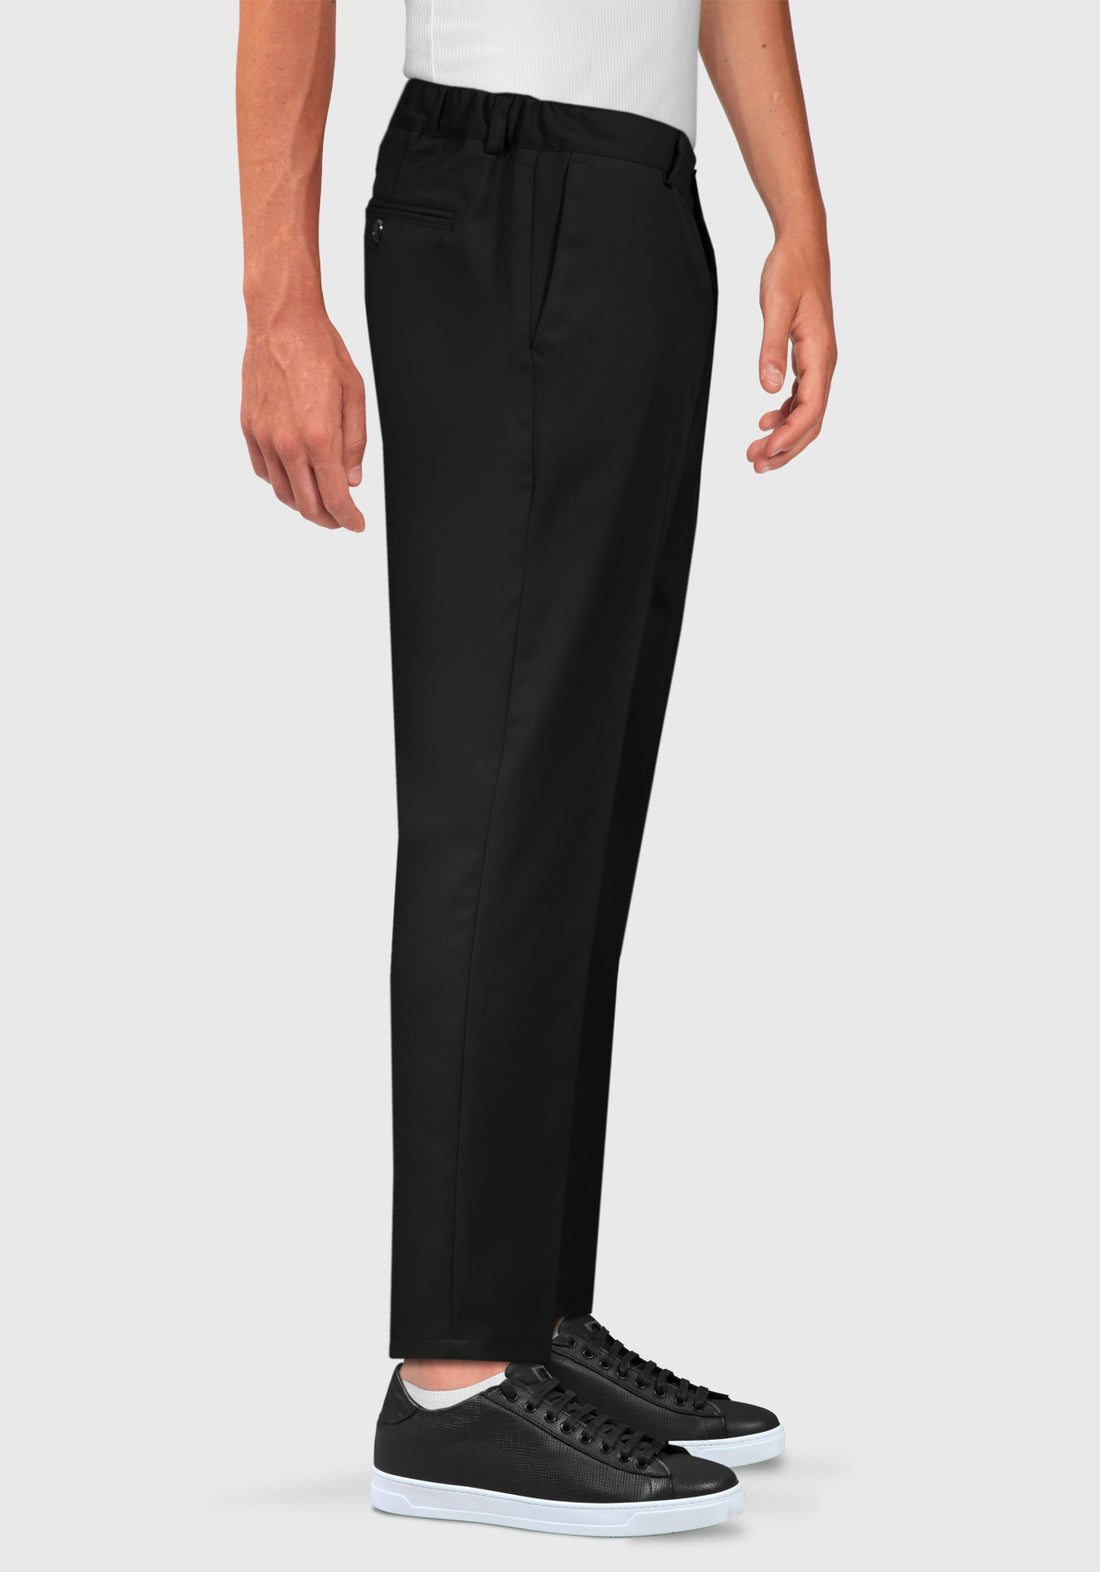 Half-breasted trousers dress with side elastics - Black